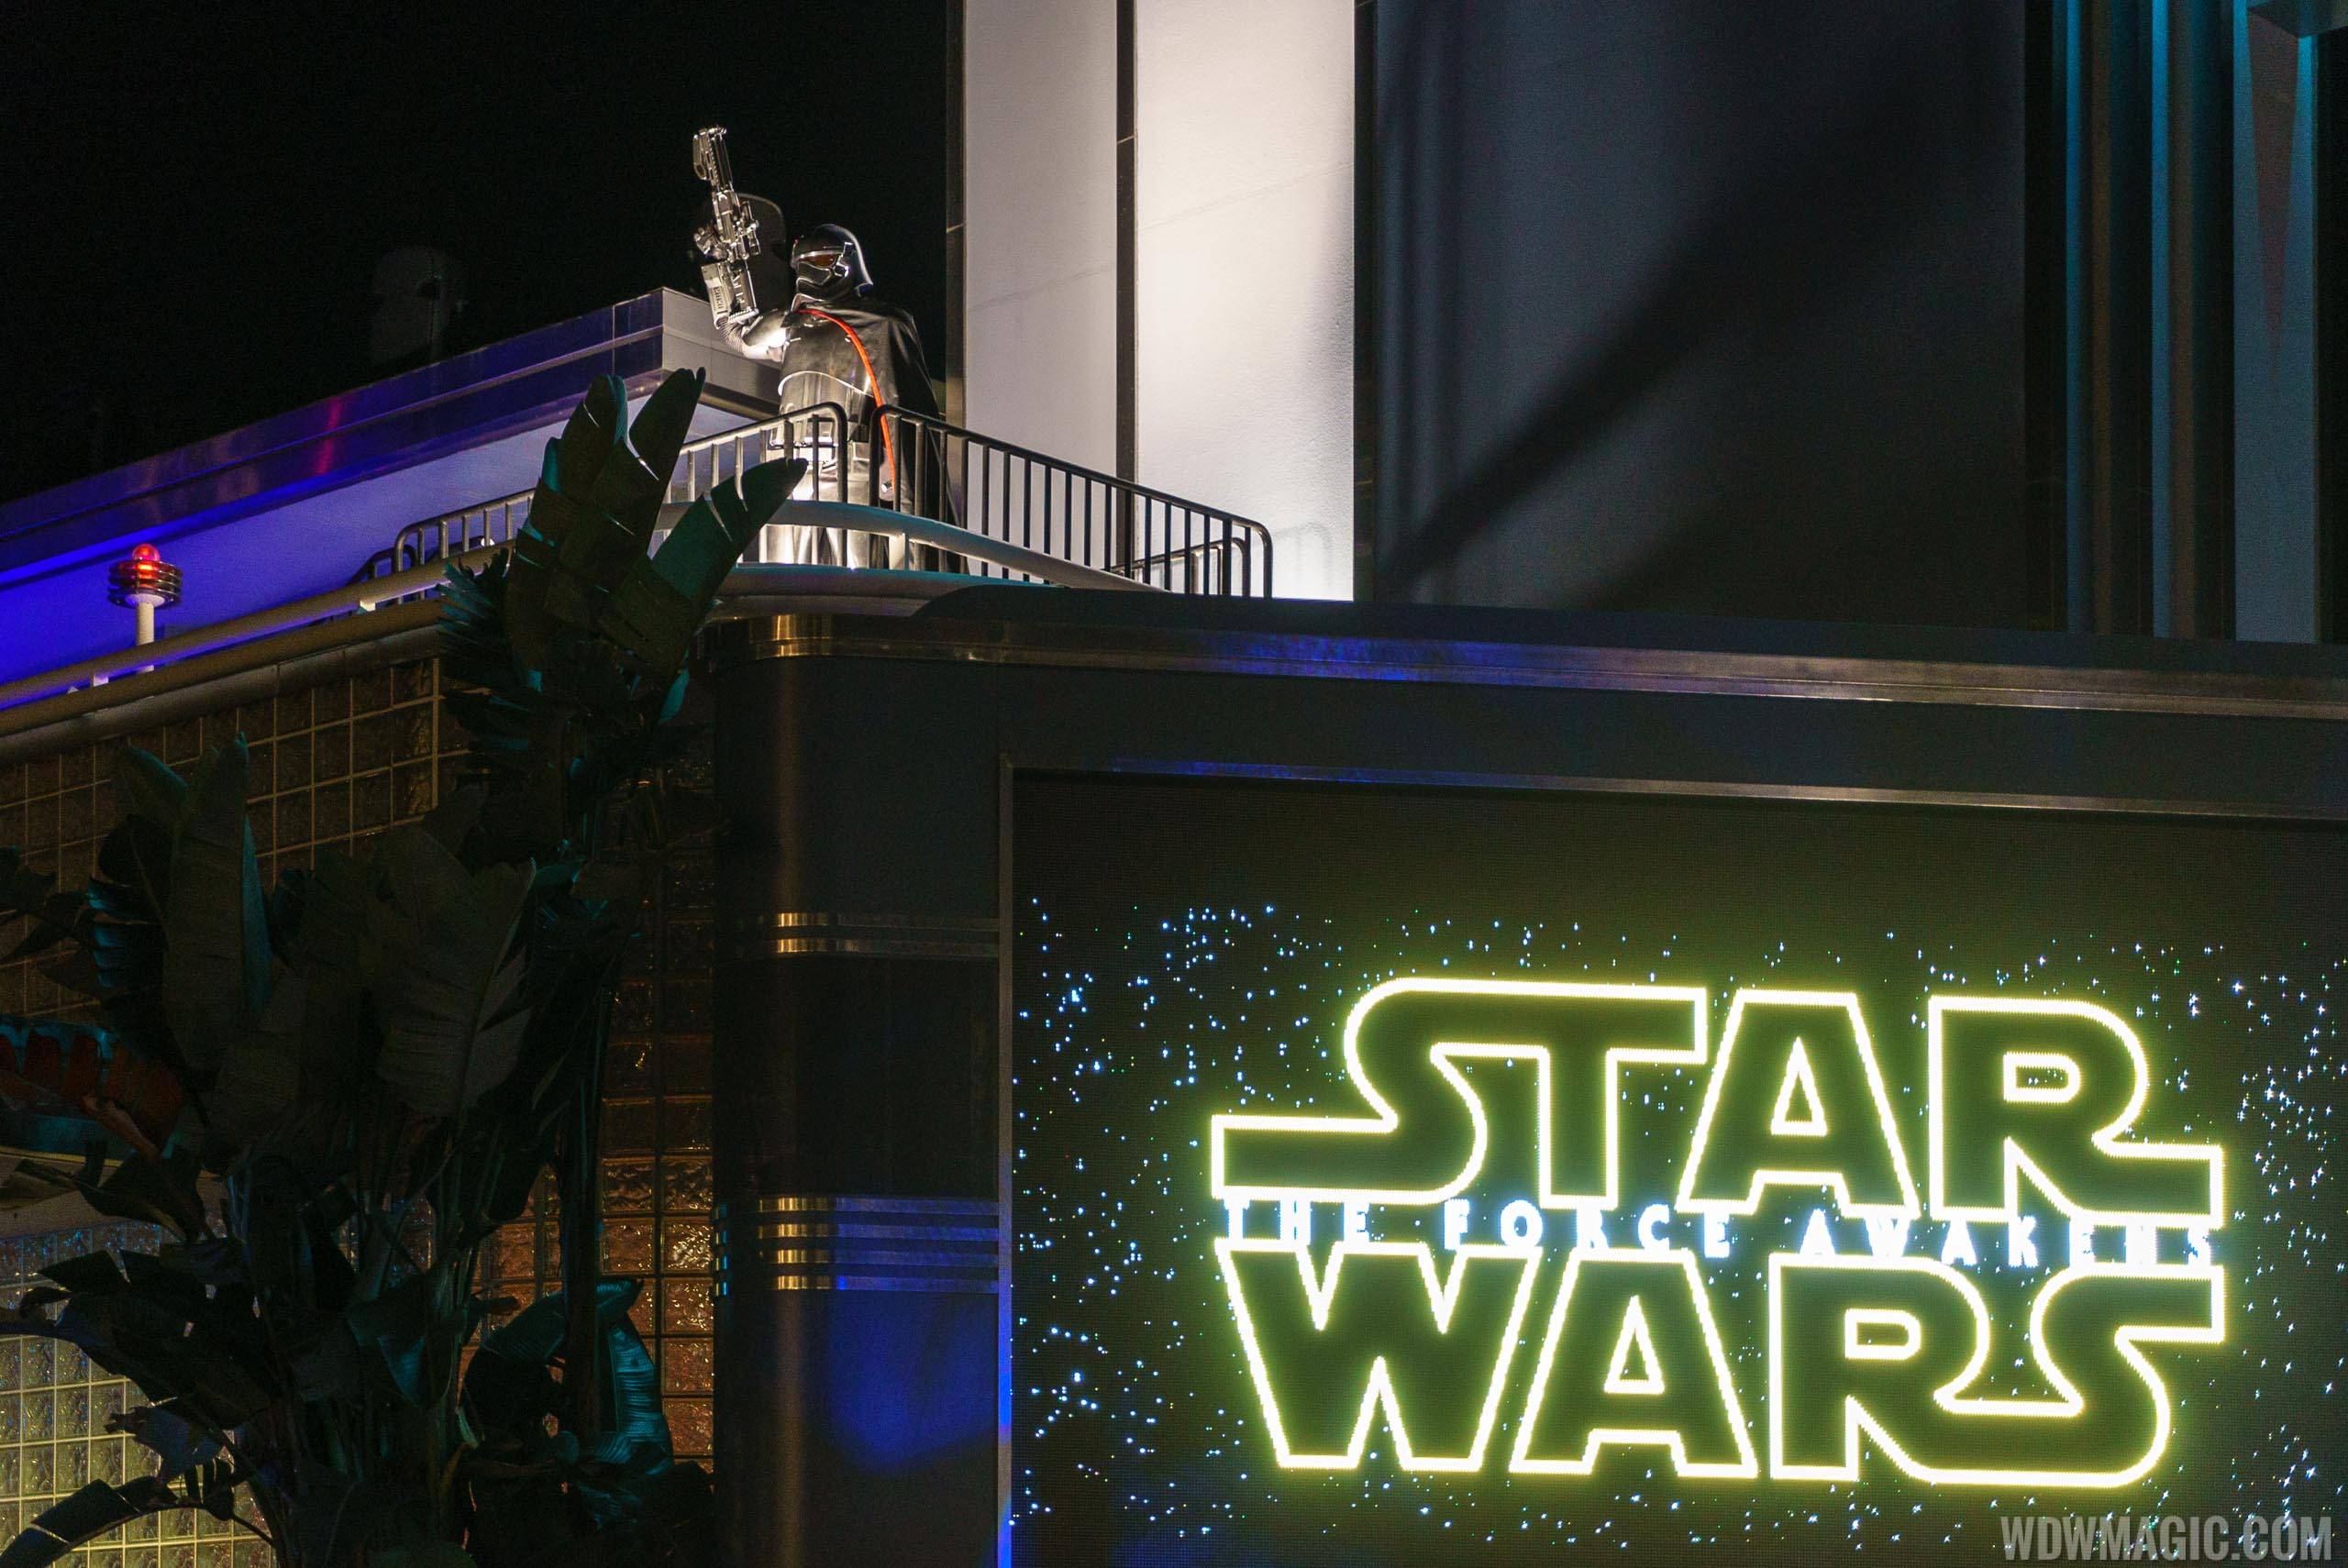 The Force Awakens Star Wars Party at Disney's Hollywood Studios in 2015